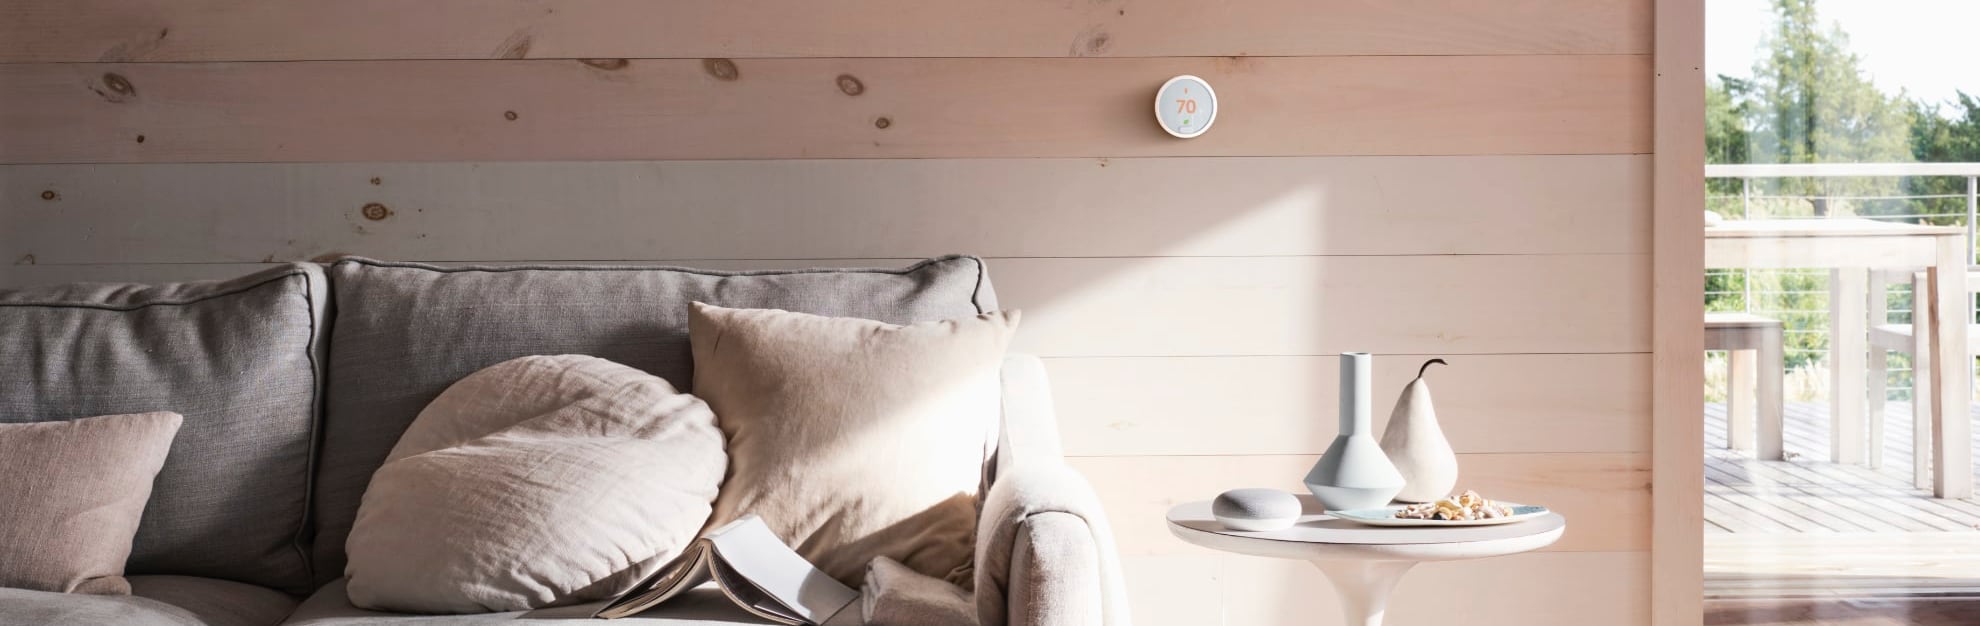 Vivint Home Automation in Columbus